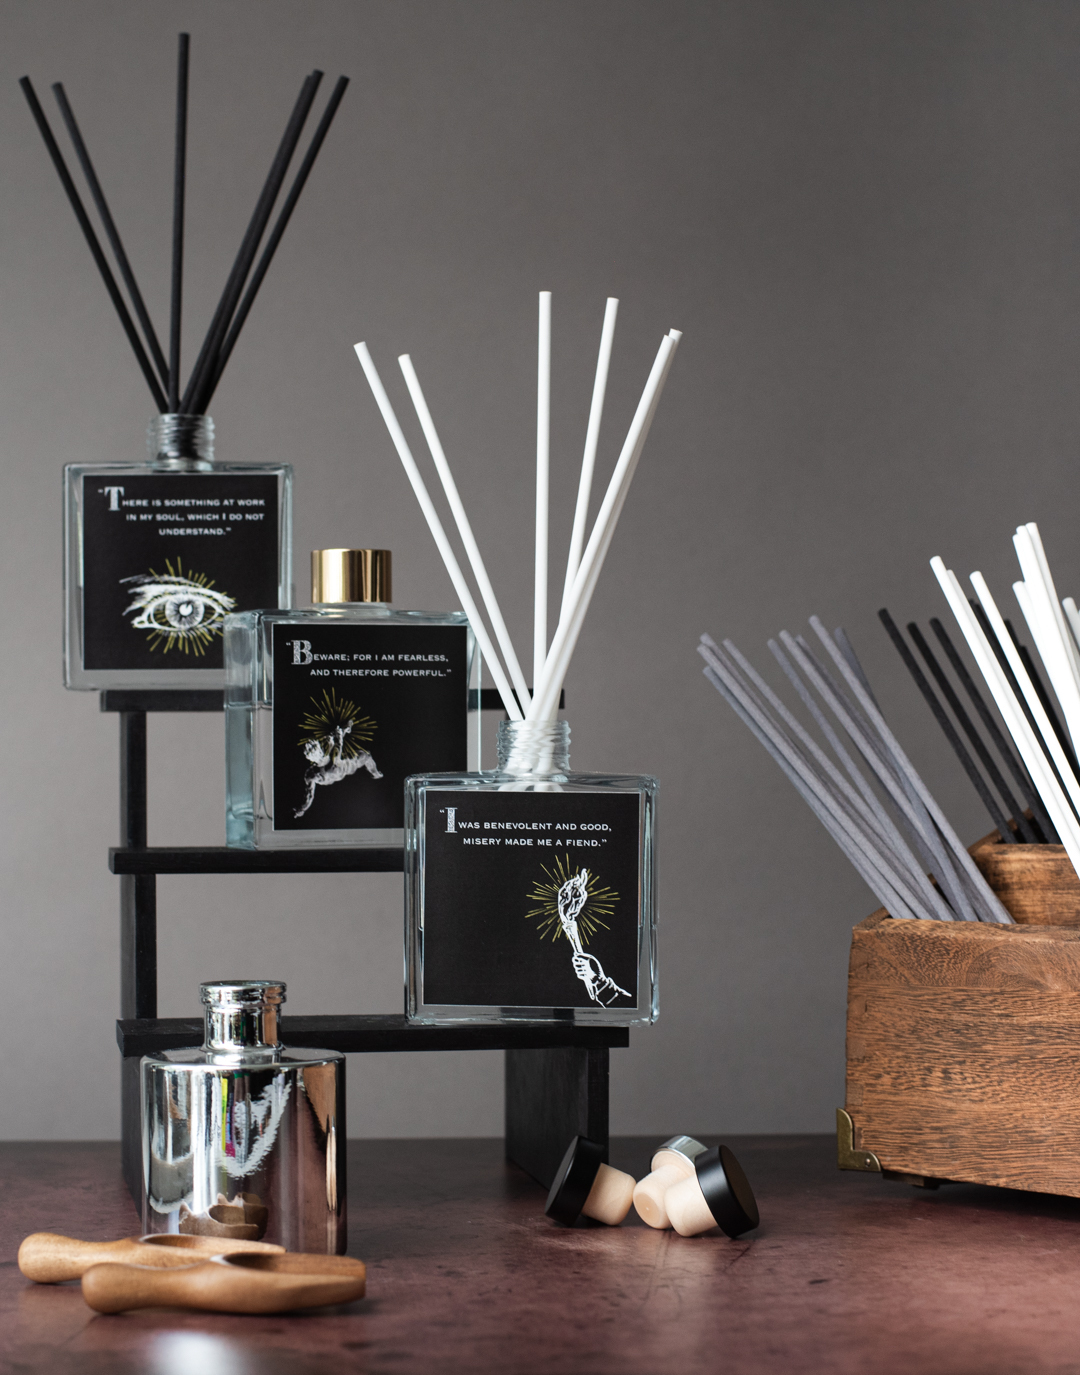 An image of three square glass reed diffusers with black and white reeds. Their labels are black and white and feature quotes from Mary Shelley's novel, Frankenstein. More black, white, and gray reeds are features off to the side out of frame in a wooden box.